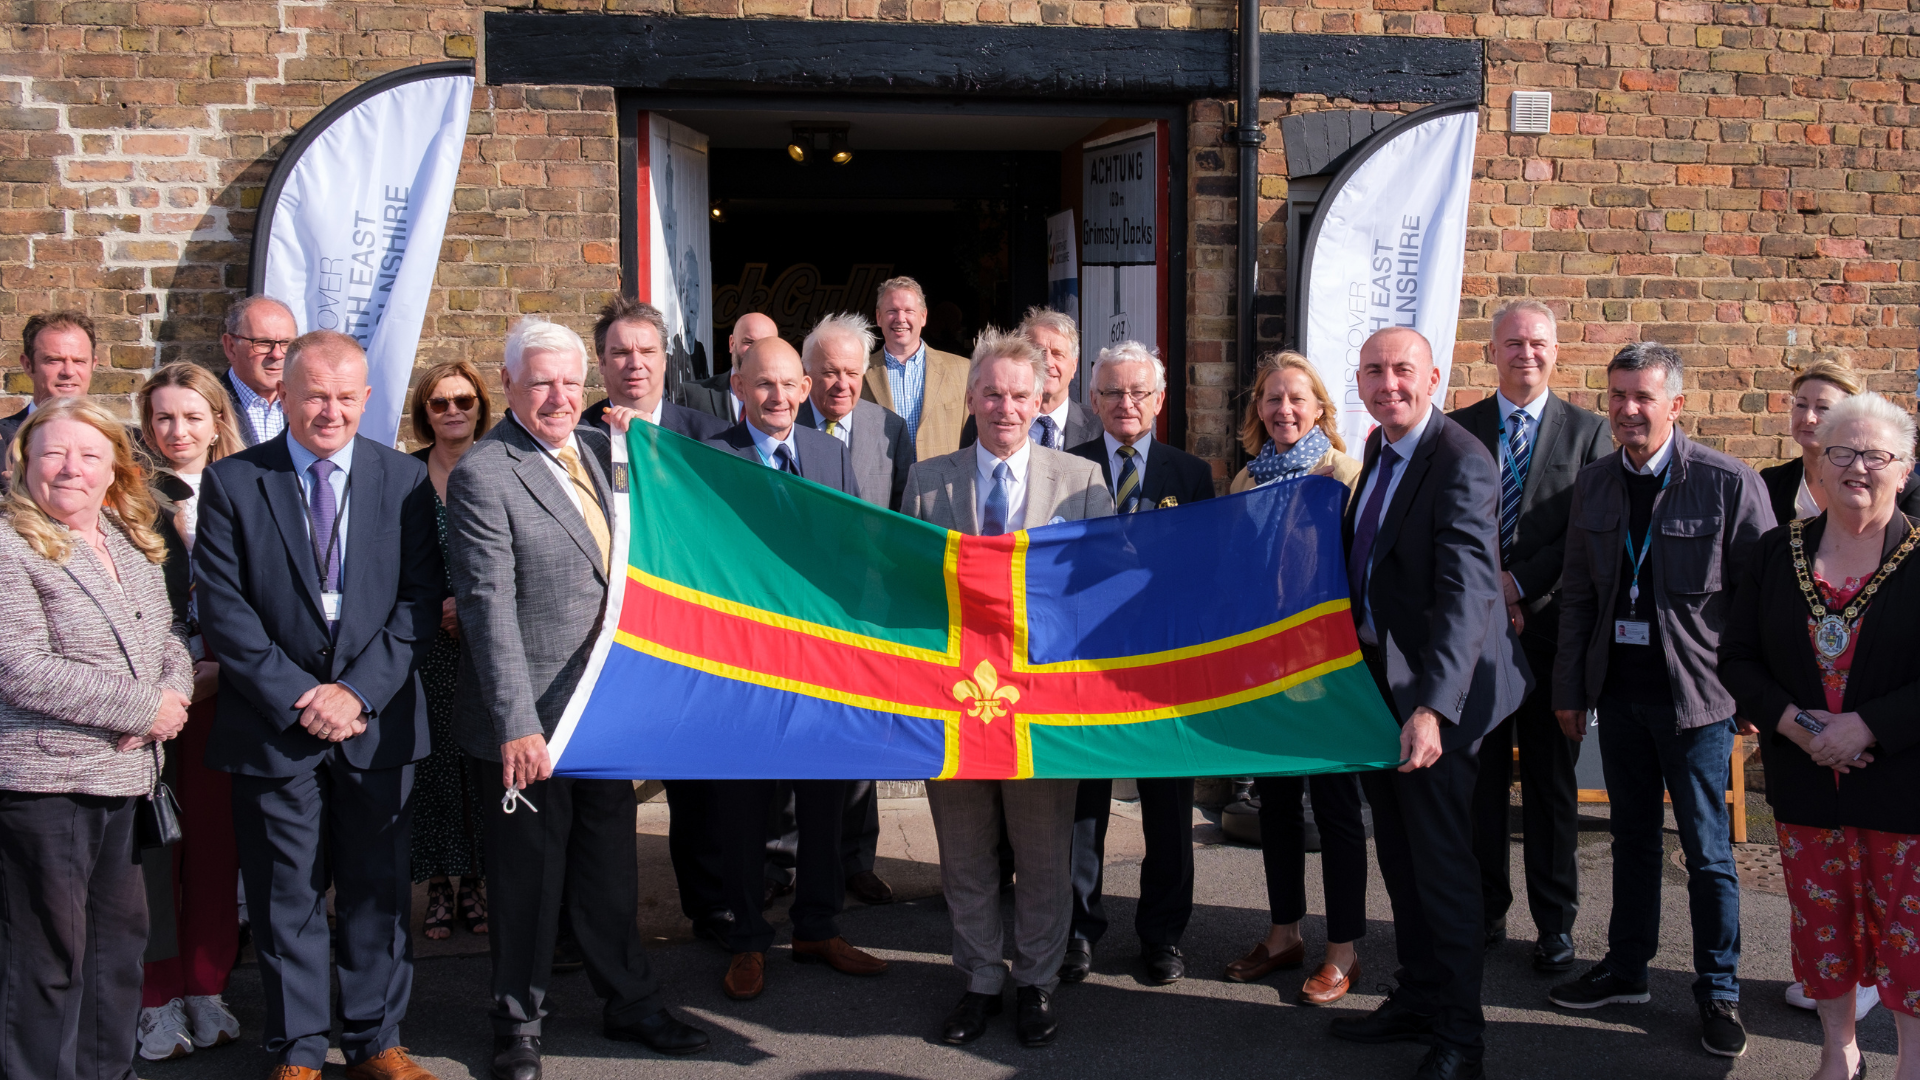 A crowd of people standing in front of a building holding the Lincolnshire Flag